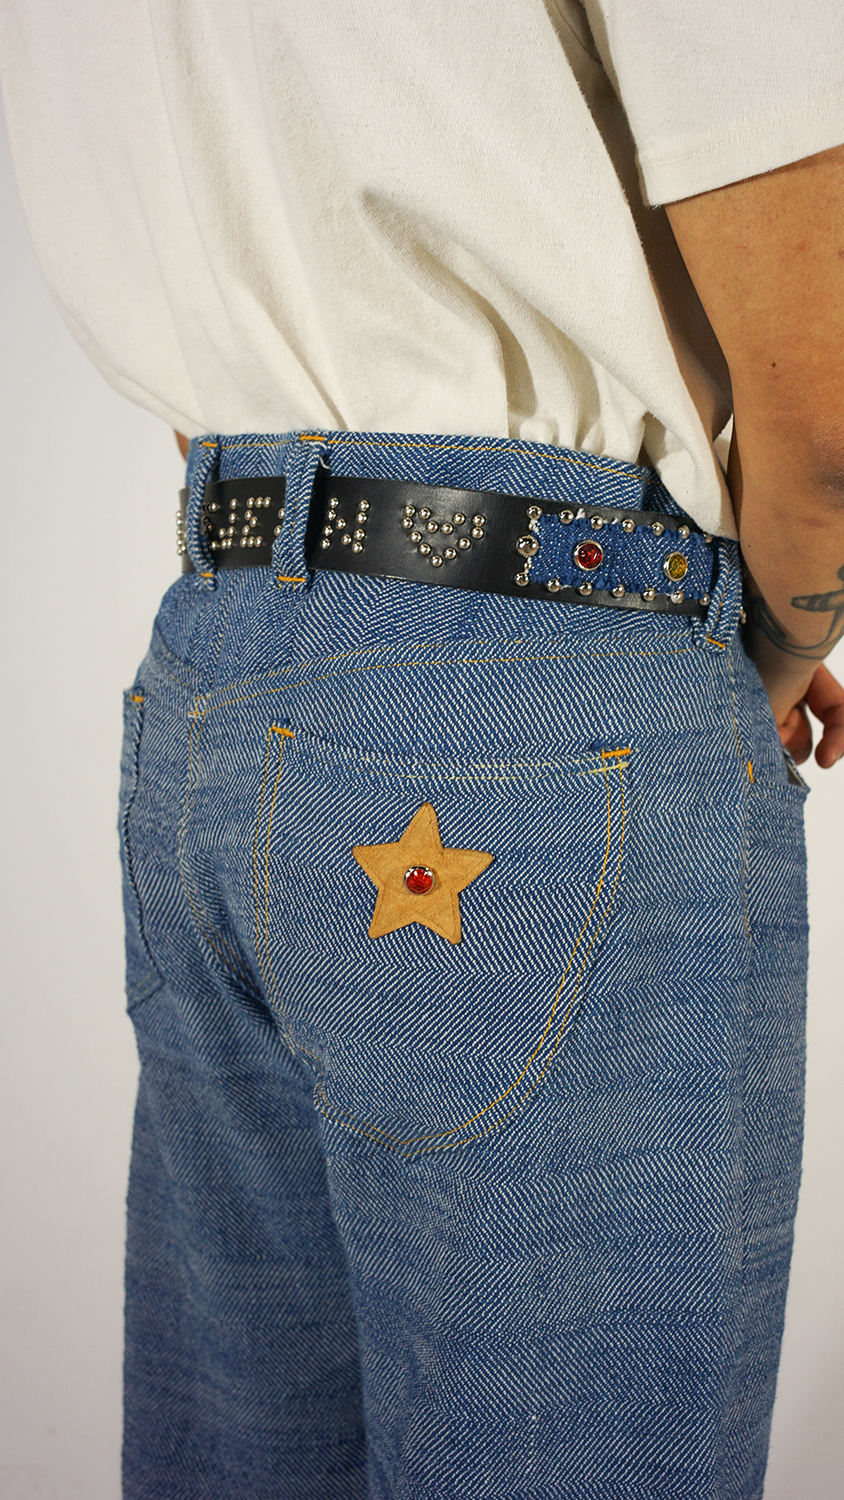 Hand woven star jeans